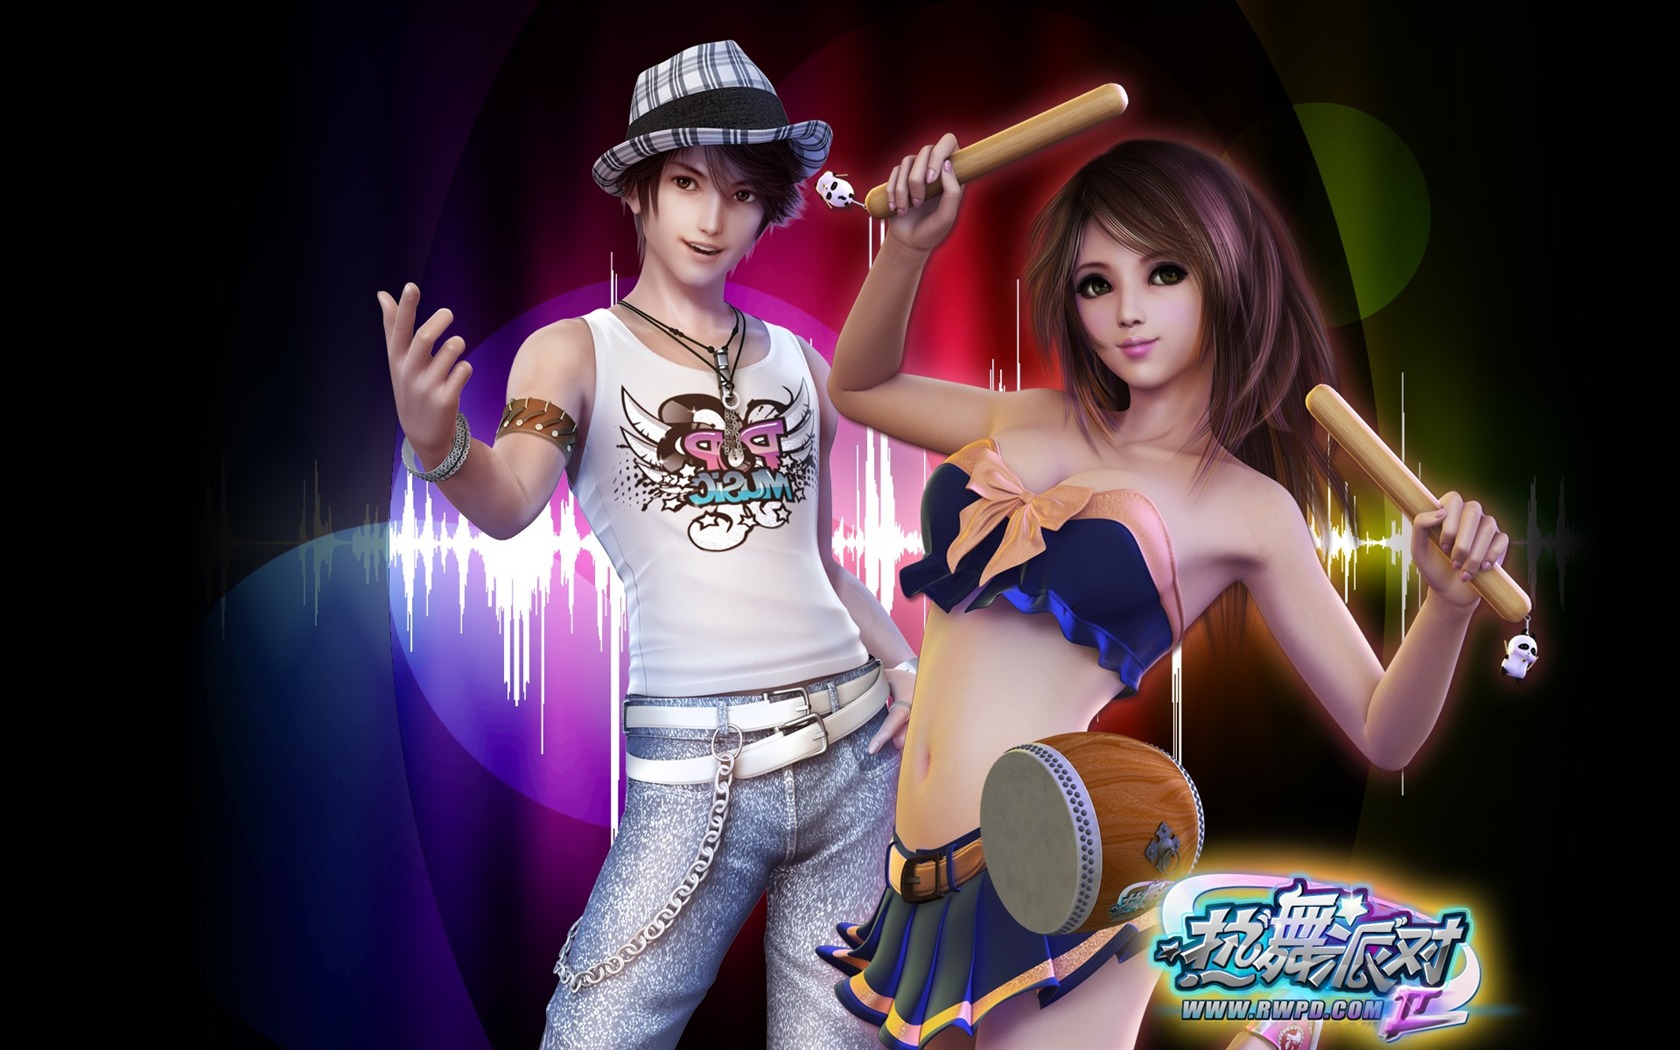 Online game Hot Dance Party II official wallpapers #20 - 1680x1050